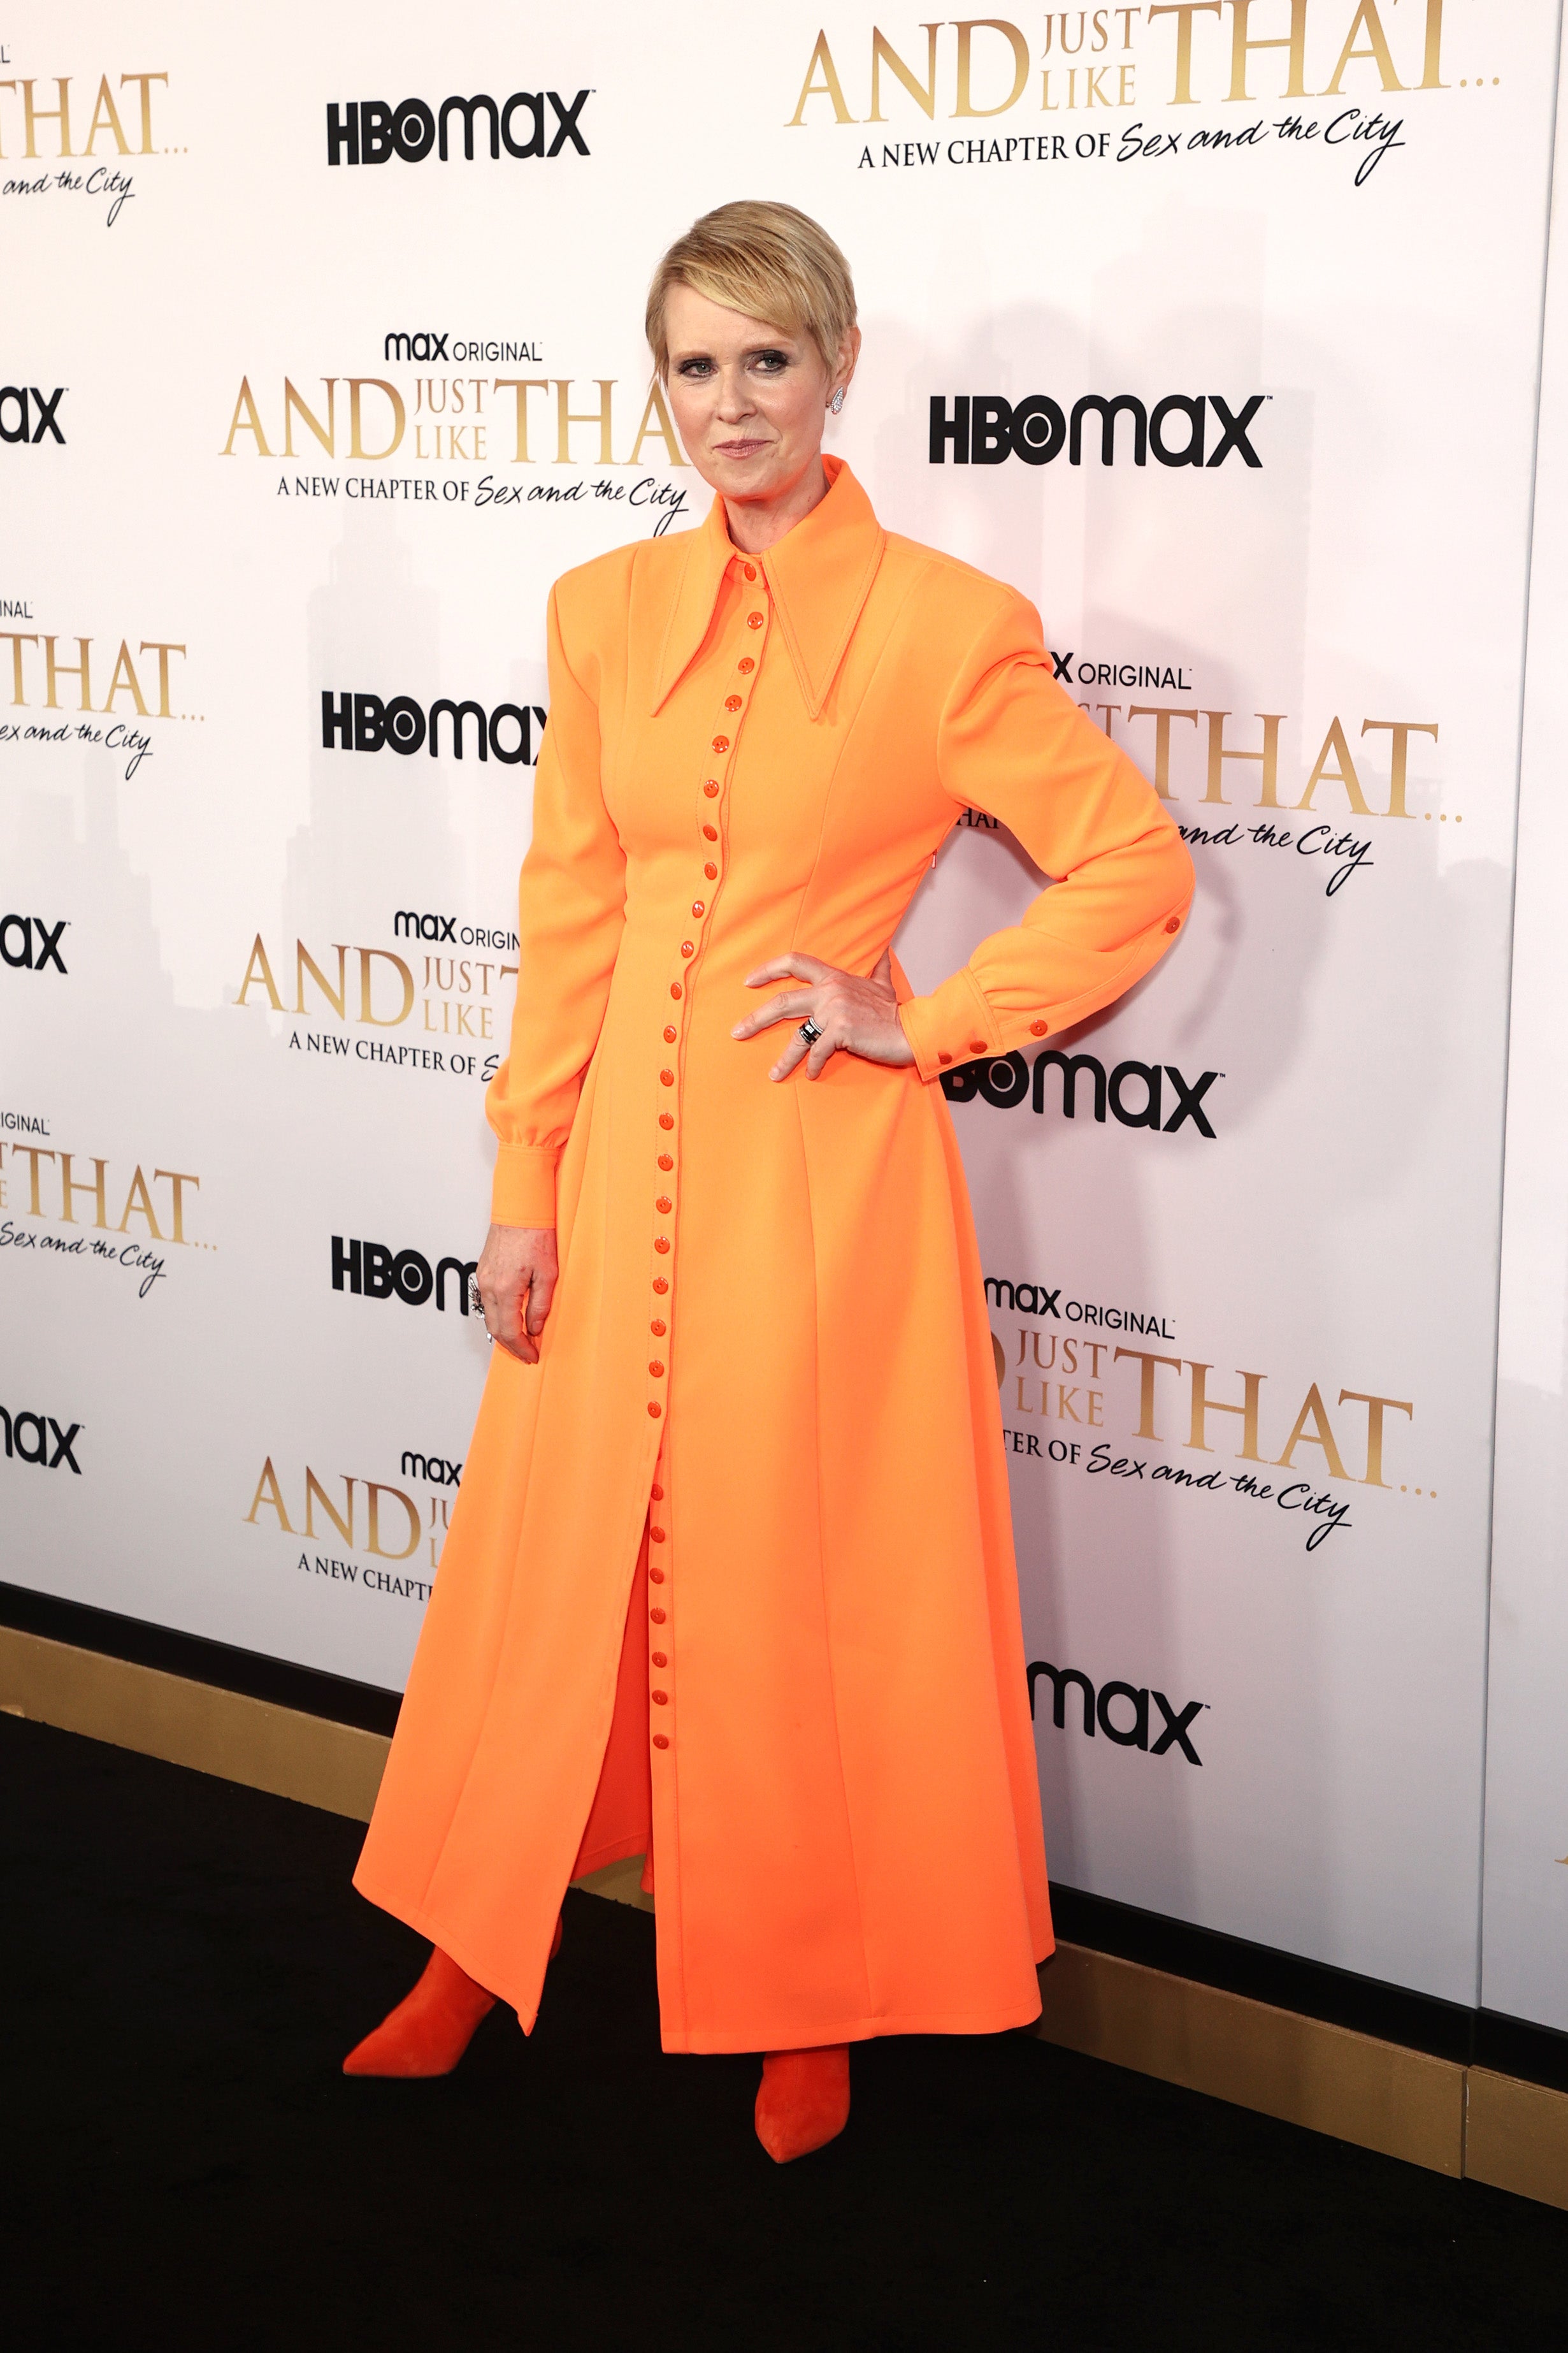 Cynthia Nixon at the And Just Like That premiere